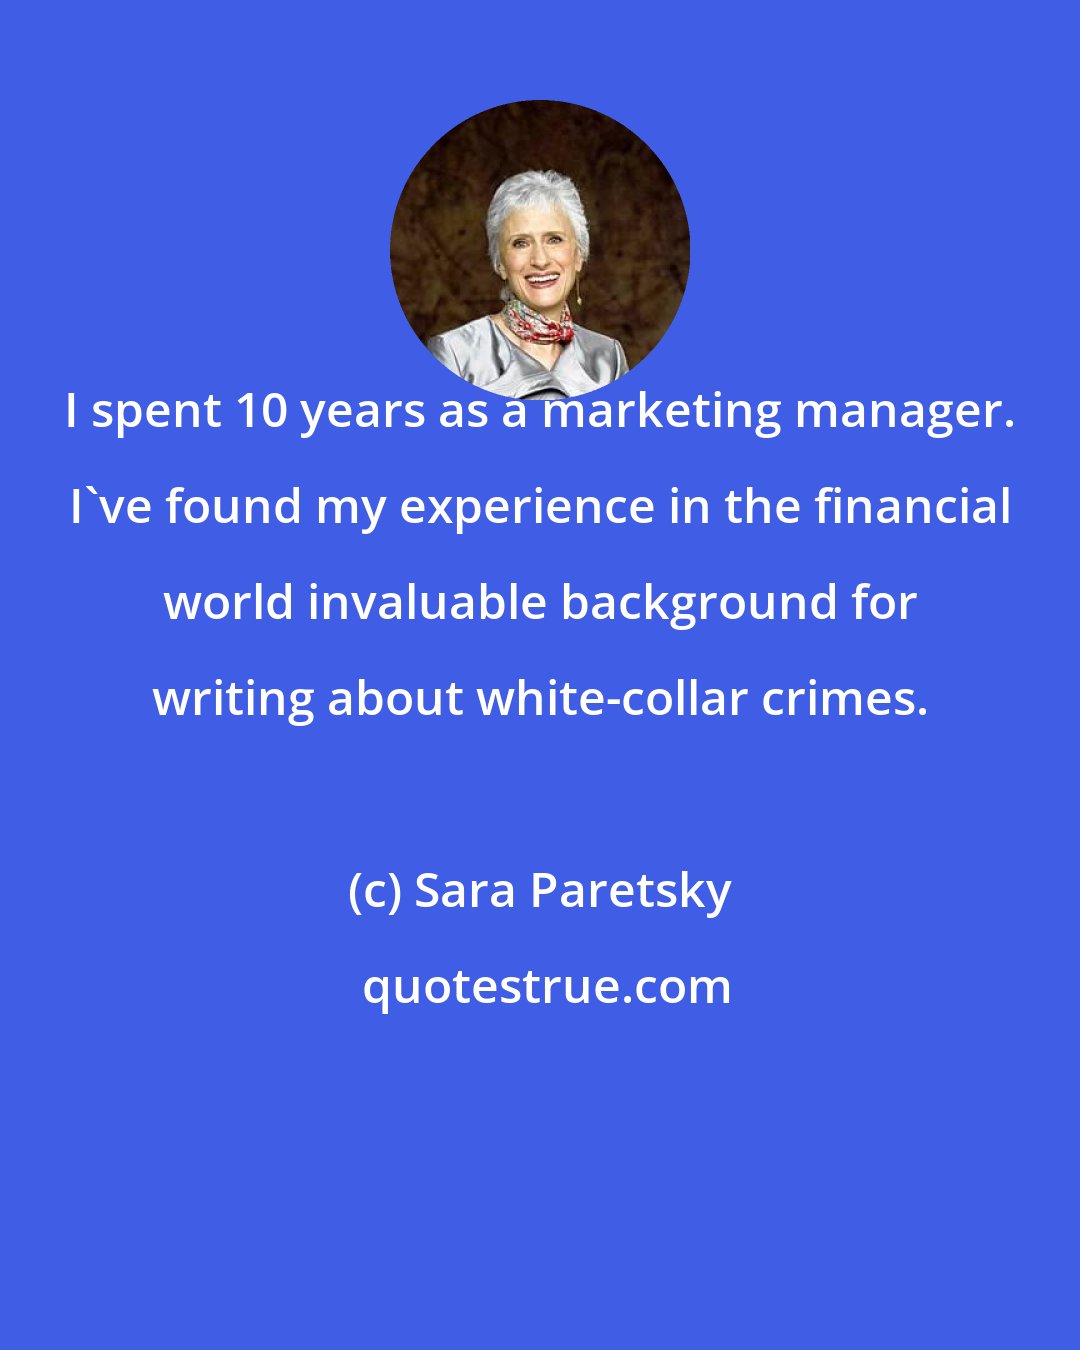 Sara Paretsky: I spent 10 years as a marketing manager. I've found my experience in the financial world invaluable background for writing about white-collar crimes.